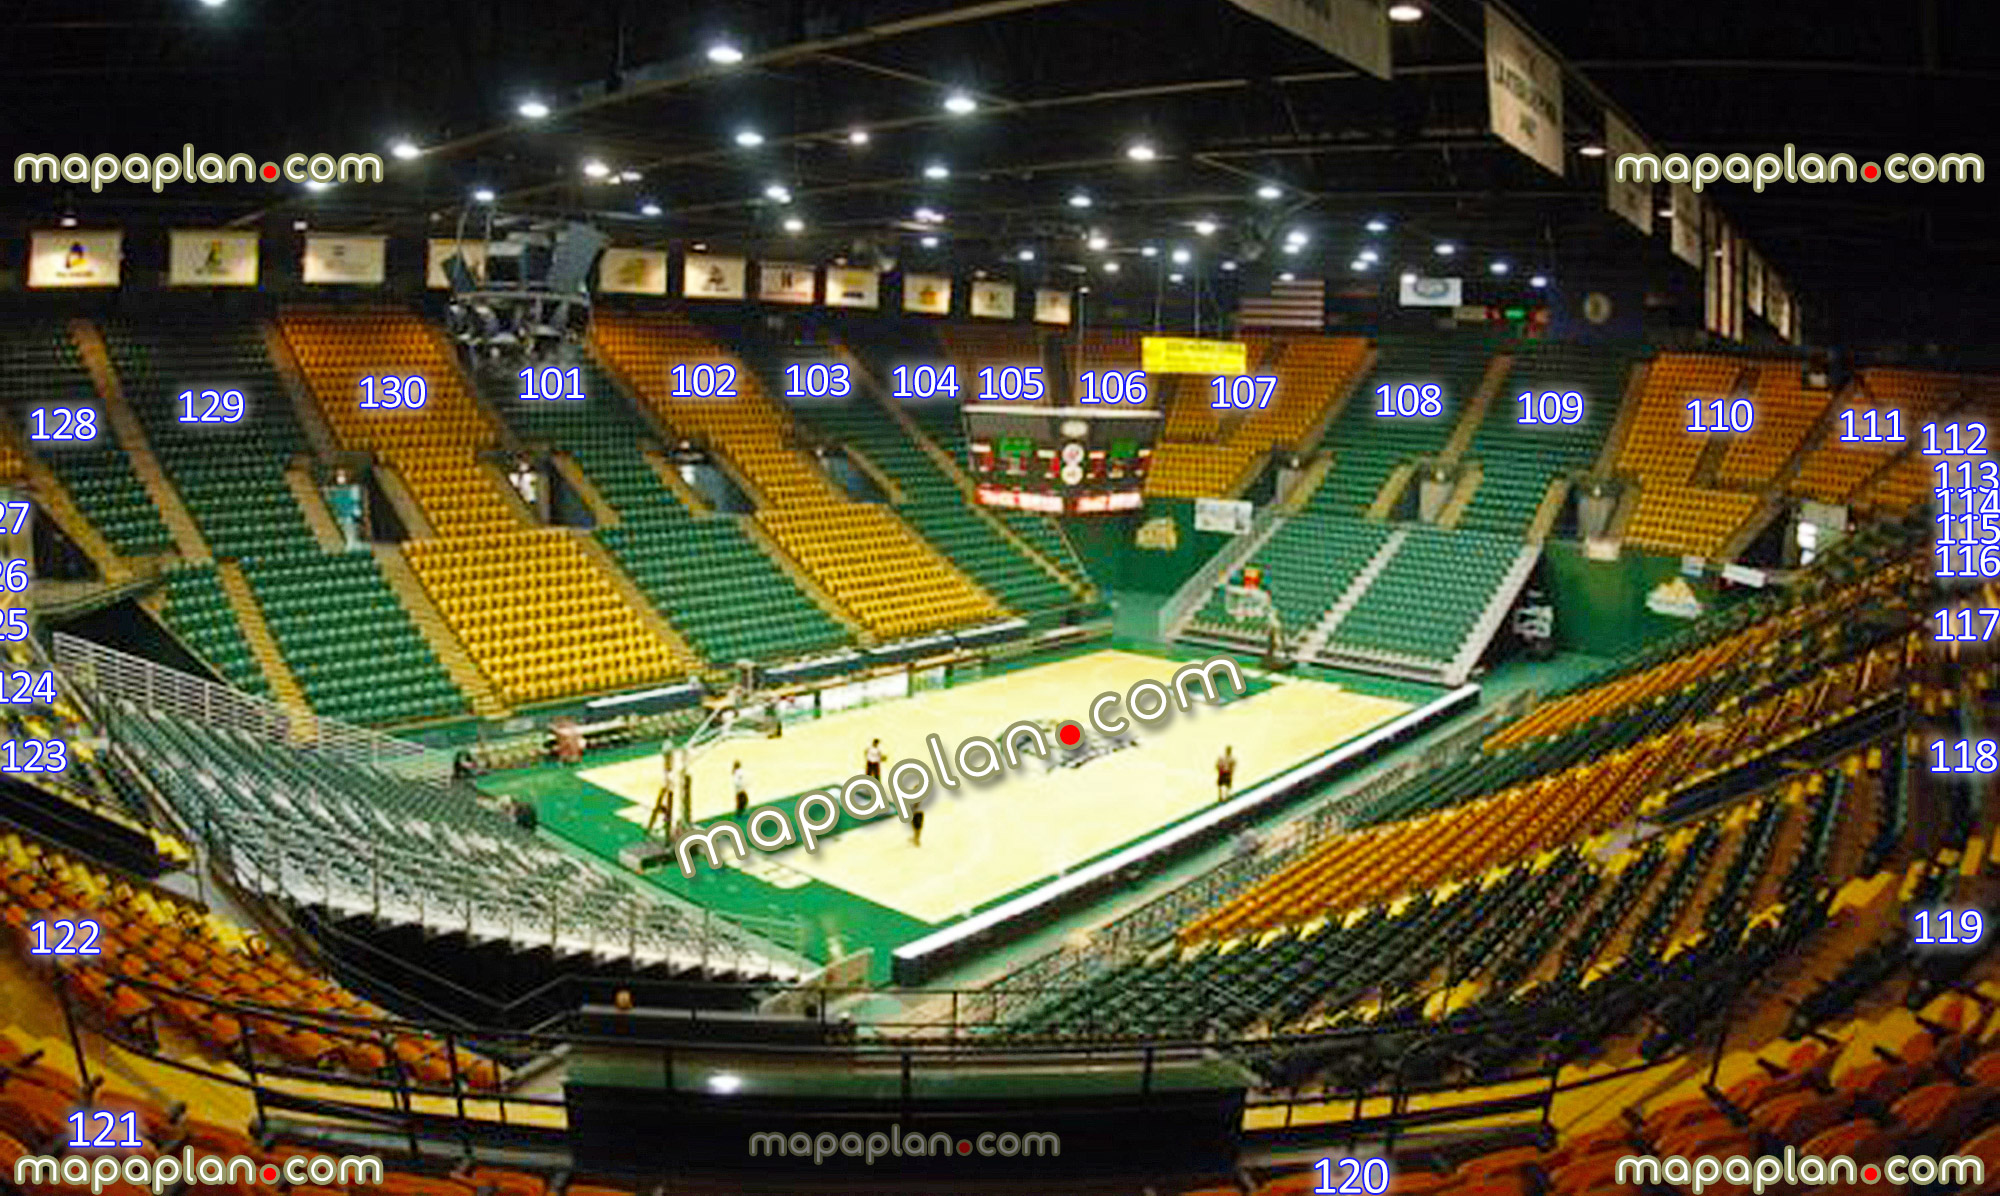 view section 120 row v seat 14 gmu patriots ncaa college basketball tournament game panorama concourse level sideline club baseline Fairfax EagleBank Arena seating chart